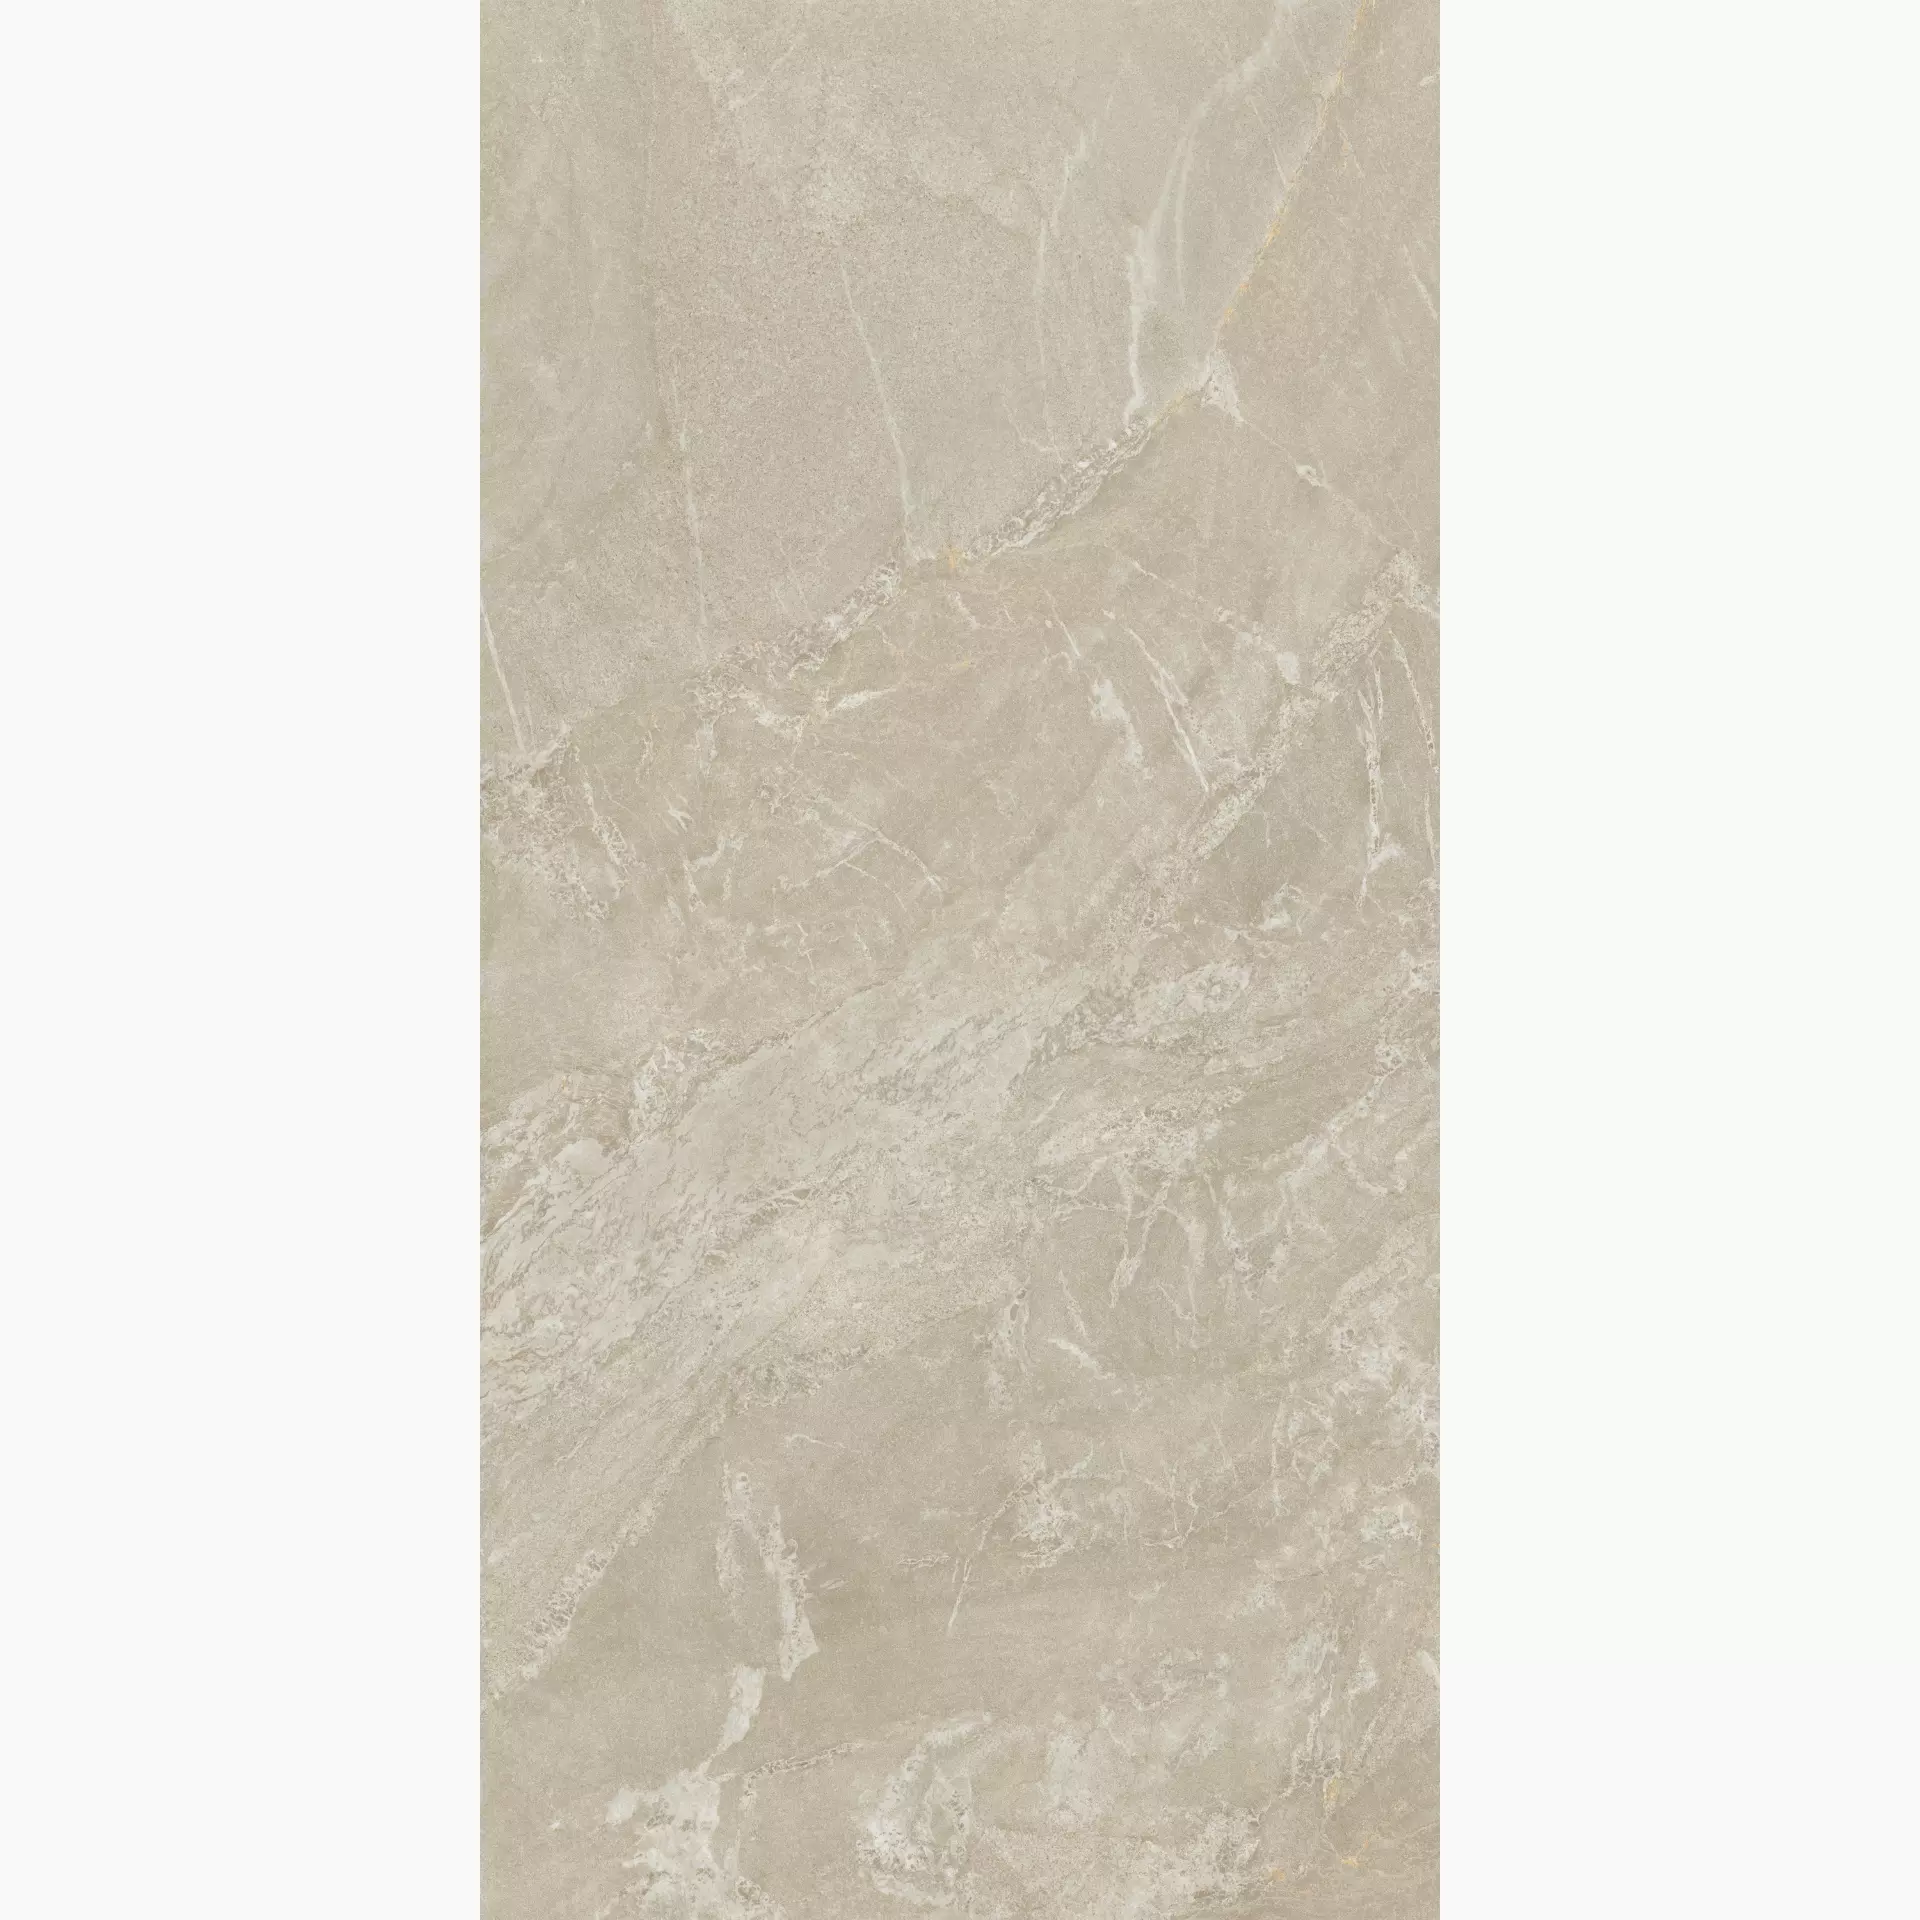 Panaria The Place County Beige Antibacterial - Naturale PGXP910 60x120cm rectified 9mm